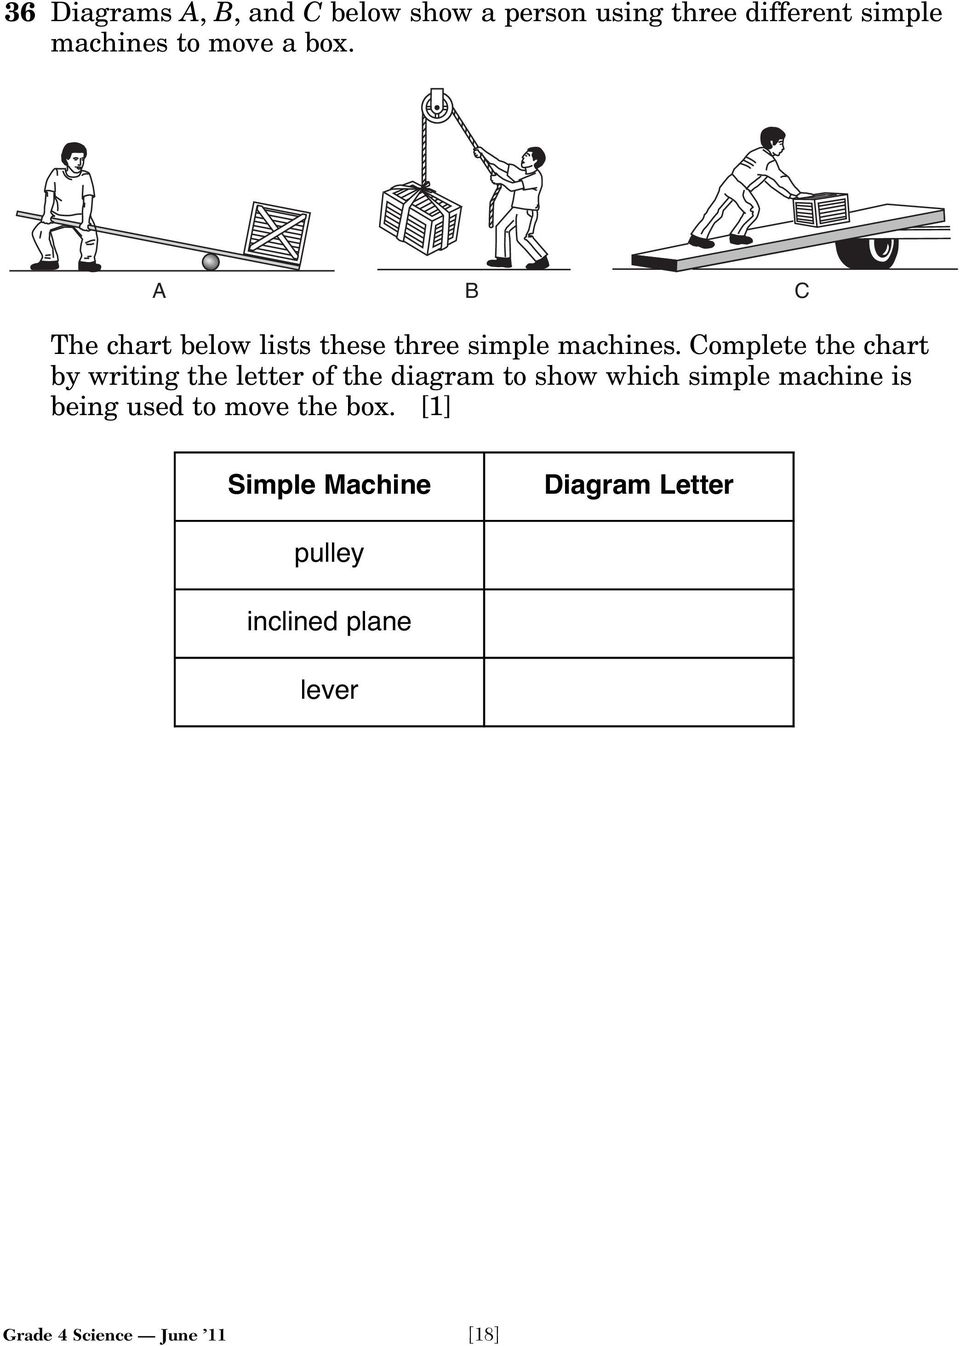 Complete the chart by writing the letter of the diagram to show which simple machine is